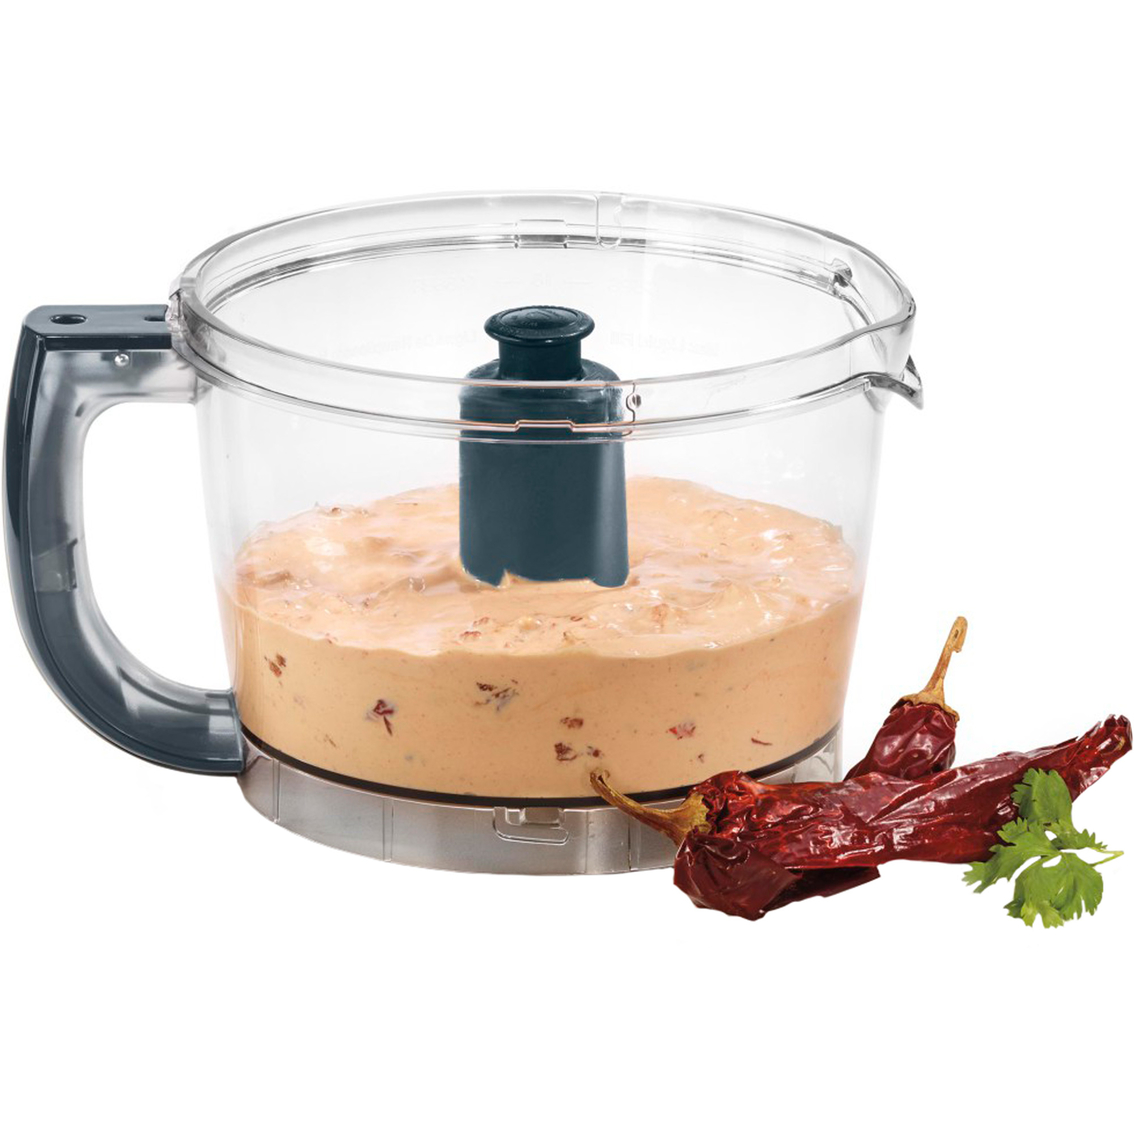 Elite Collection 2.0 12-Cup Food Processor in Die Cast - Image 6 of 9